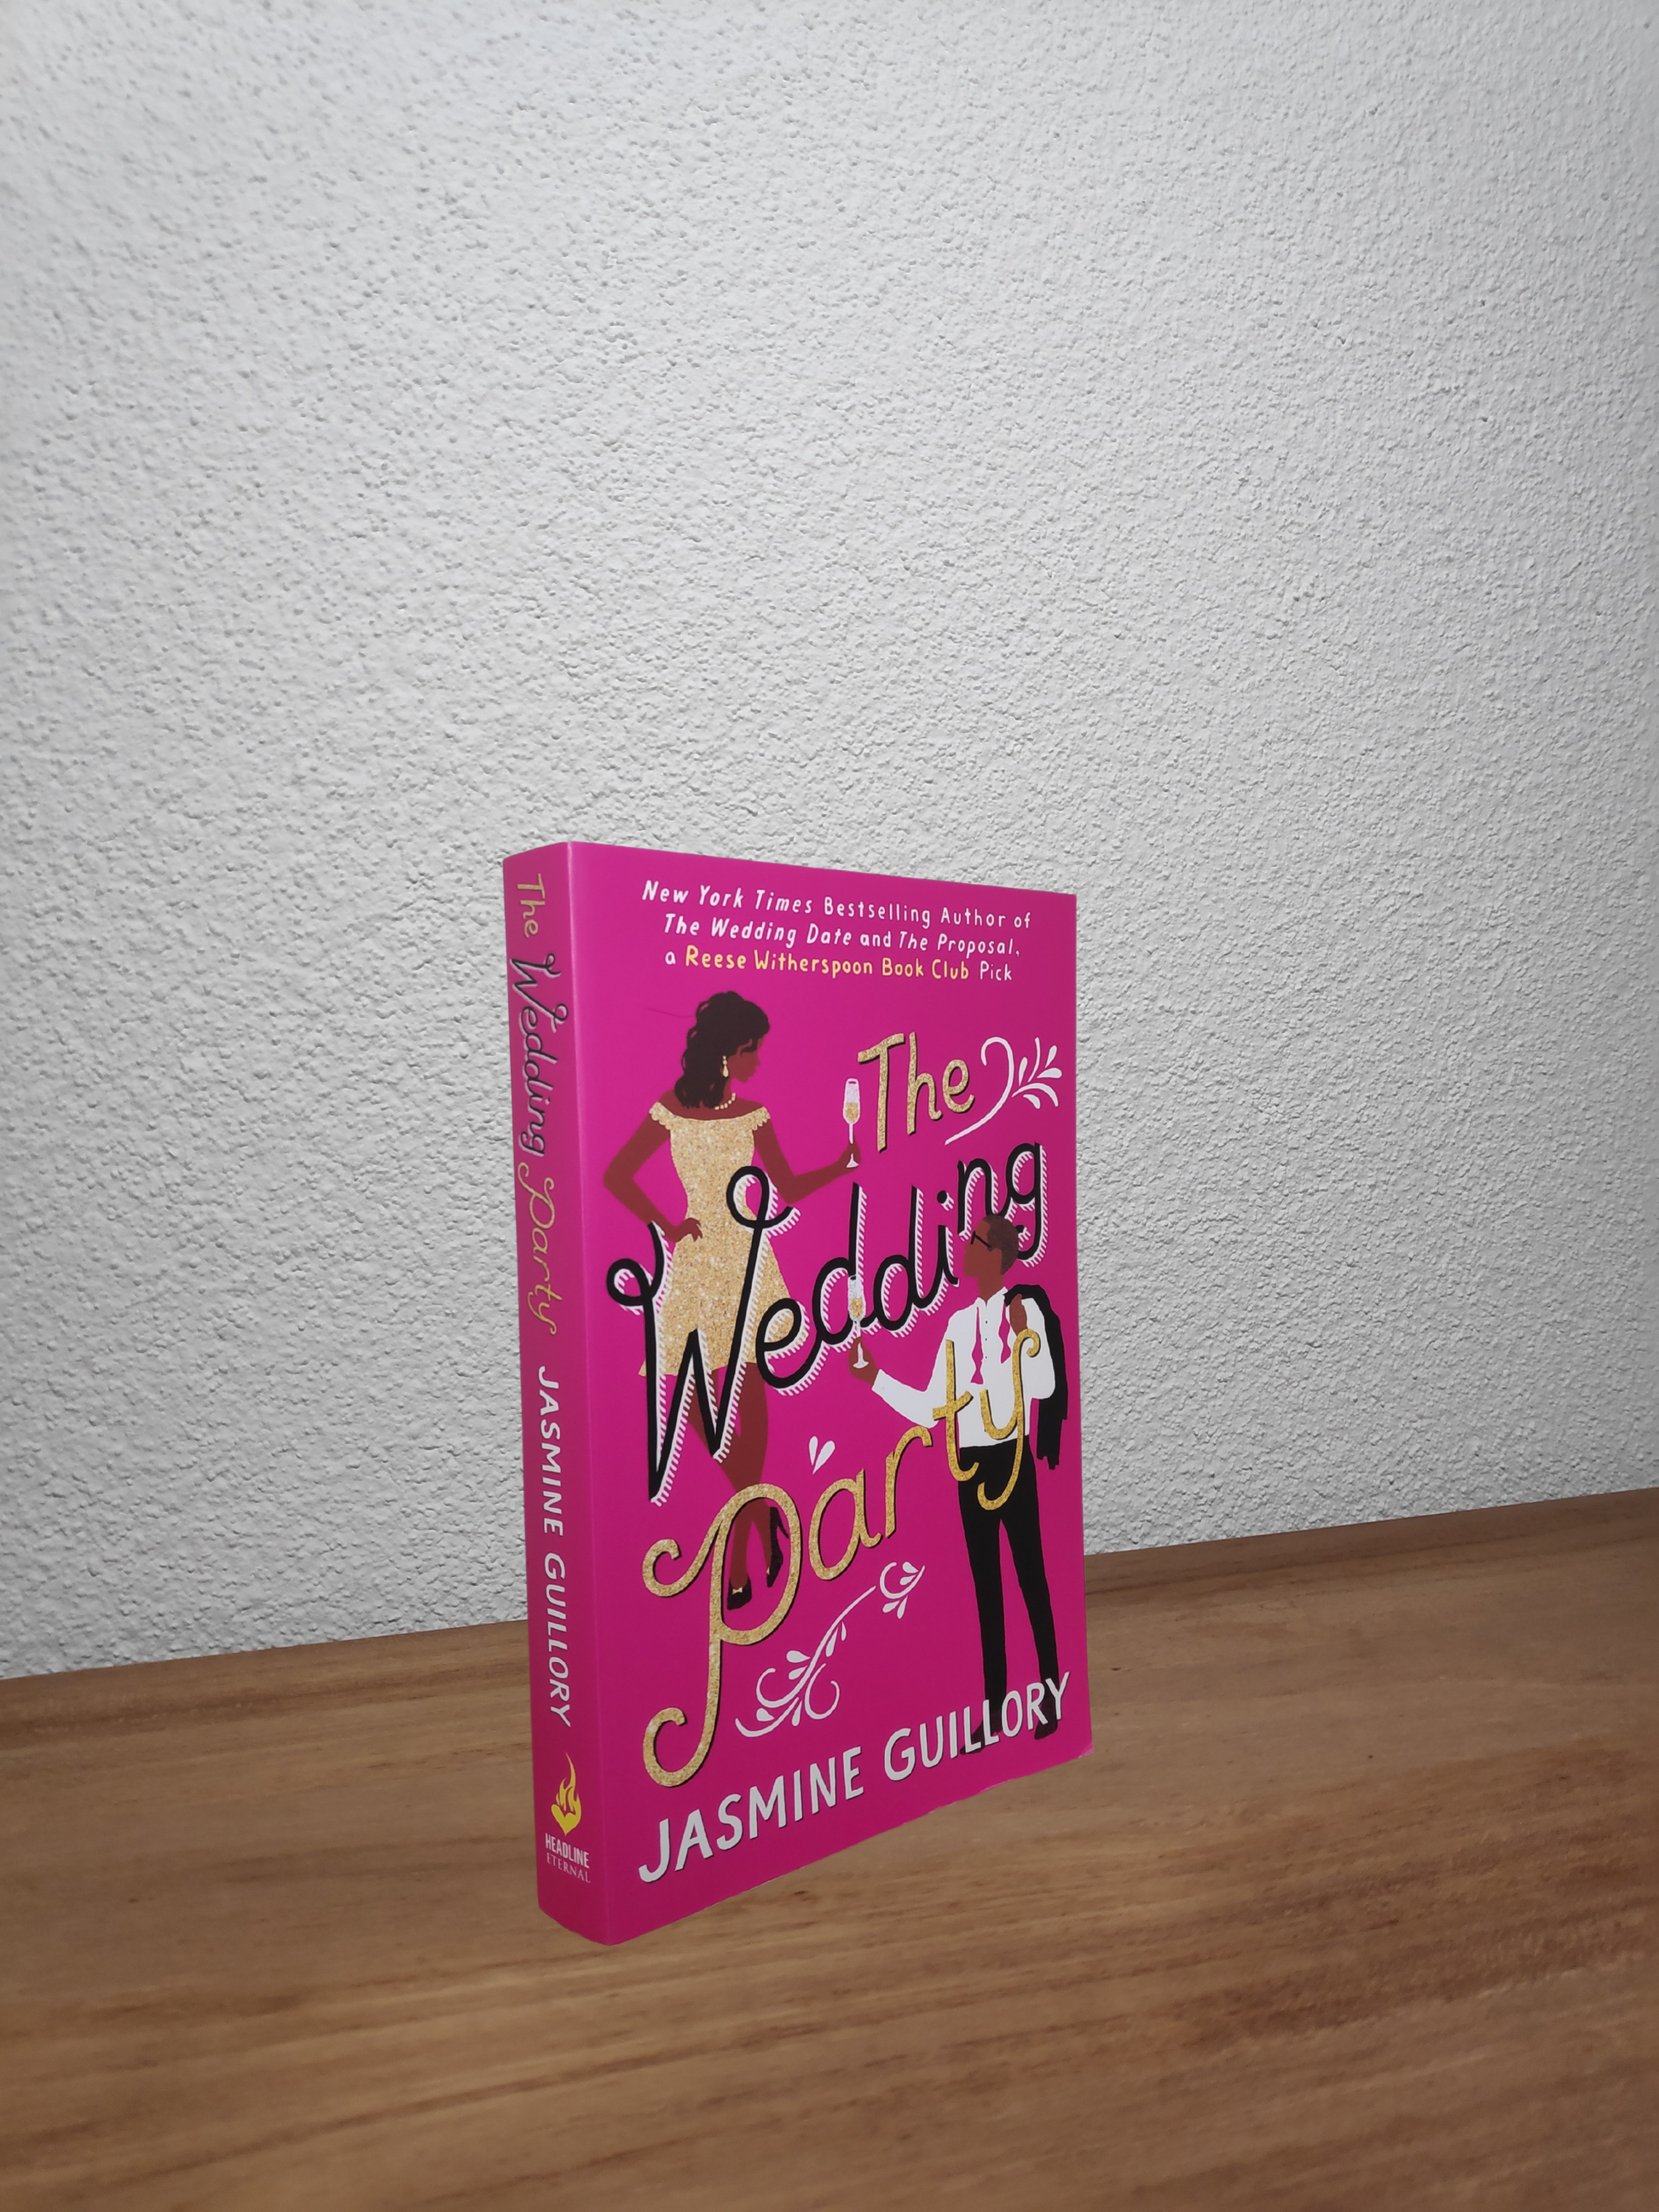 Jasmine Guillory - The Wedding Party  - Second-hand english book to deliver in Zurich & Switzerland